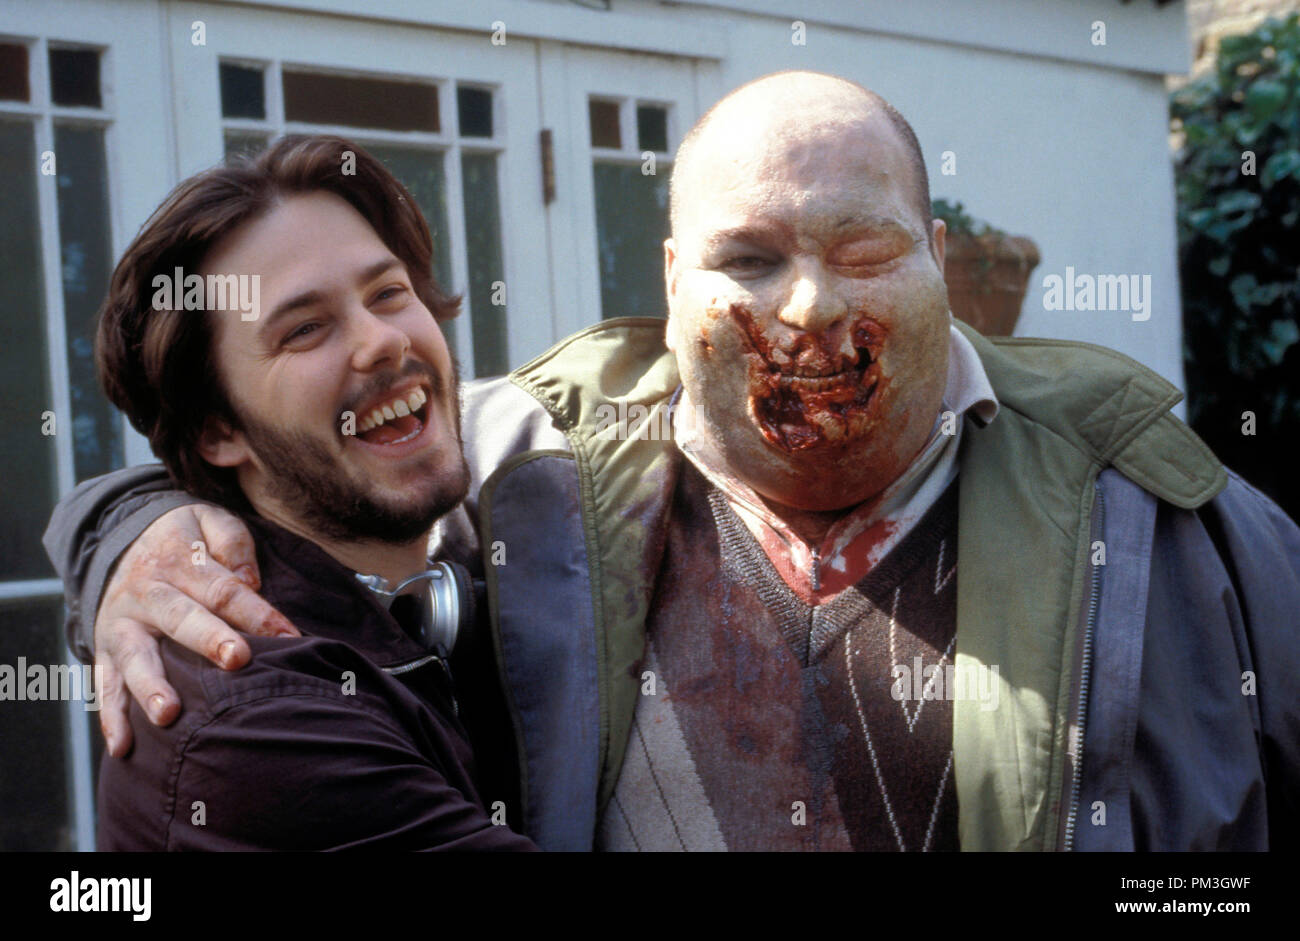 Film Still from 'Shaun Of The Dead' Edgar Wright,  Zombie © 2004 Rogue Features  File Reference # 30735669THA  For Editorial Use Only -  All Rights Reserved Stock Photo